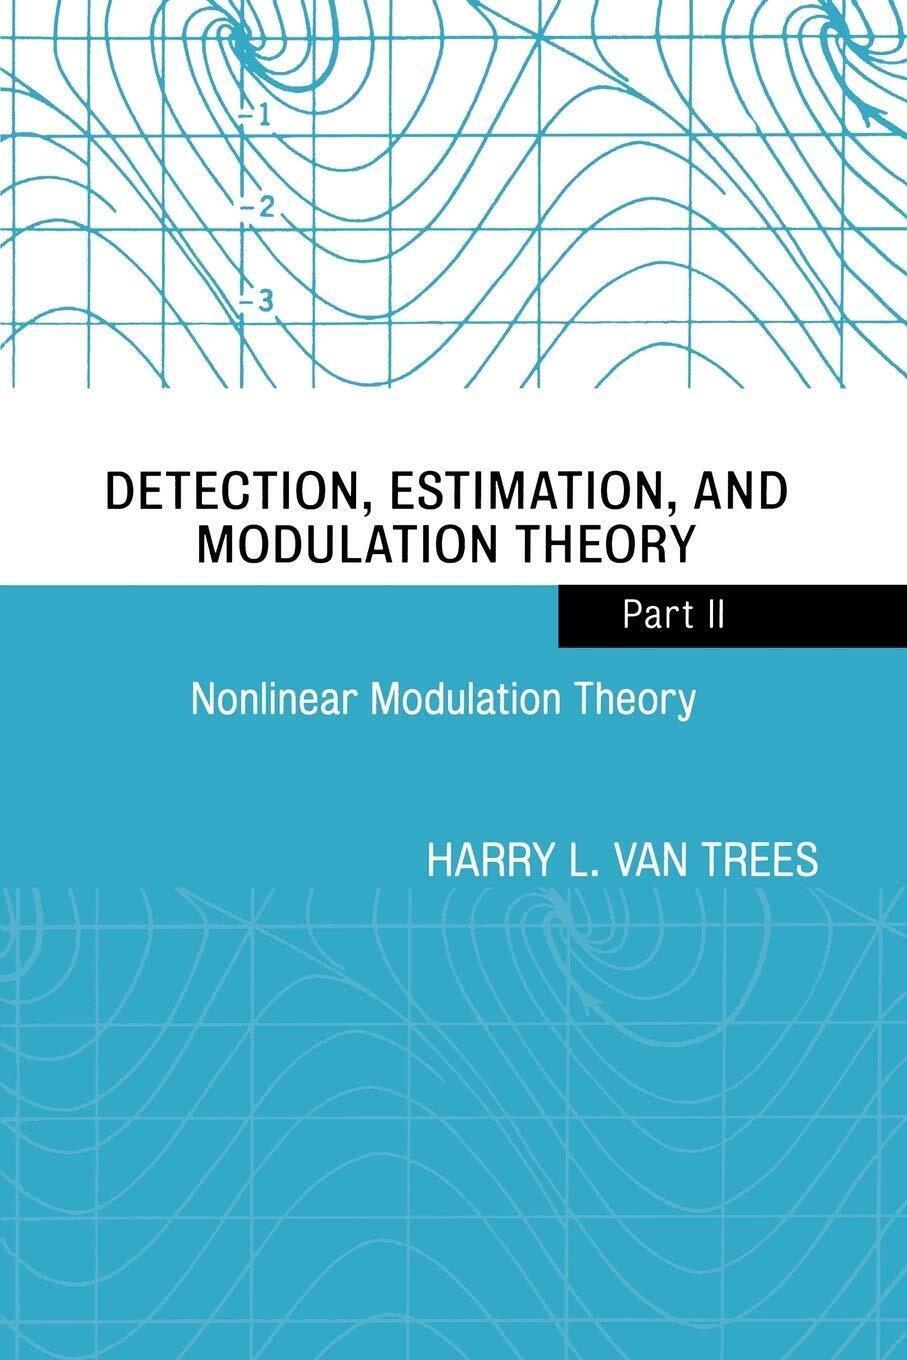 Nonlinear Modulation Theory (Detection, Estimation, and Modulation Theory)